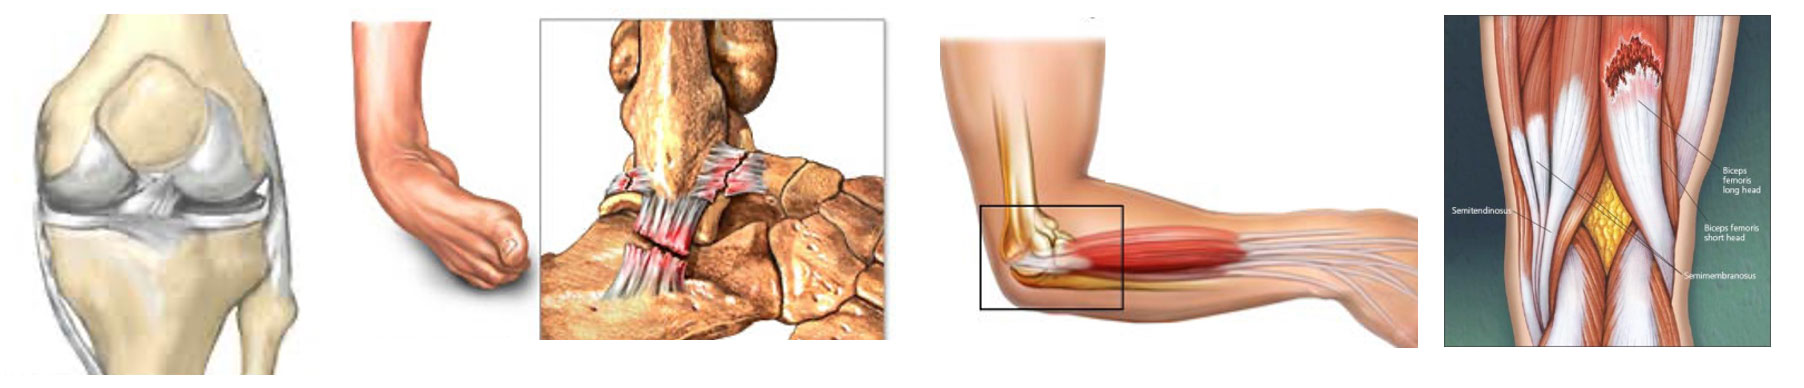 PRP Injections can be used for joints, ligaments, tendons and muscles.